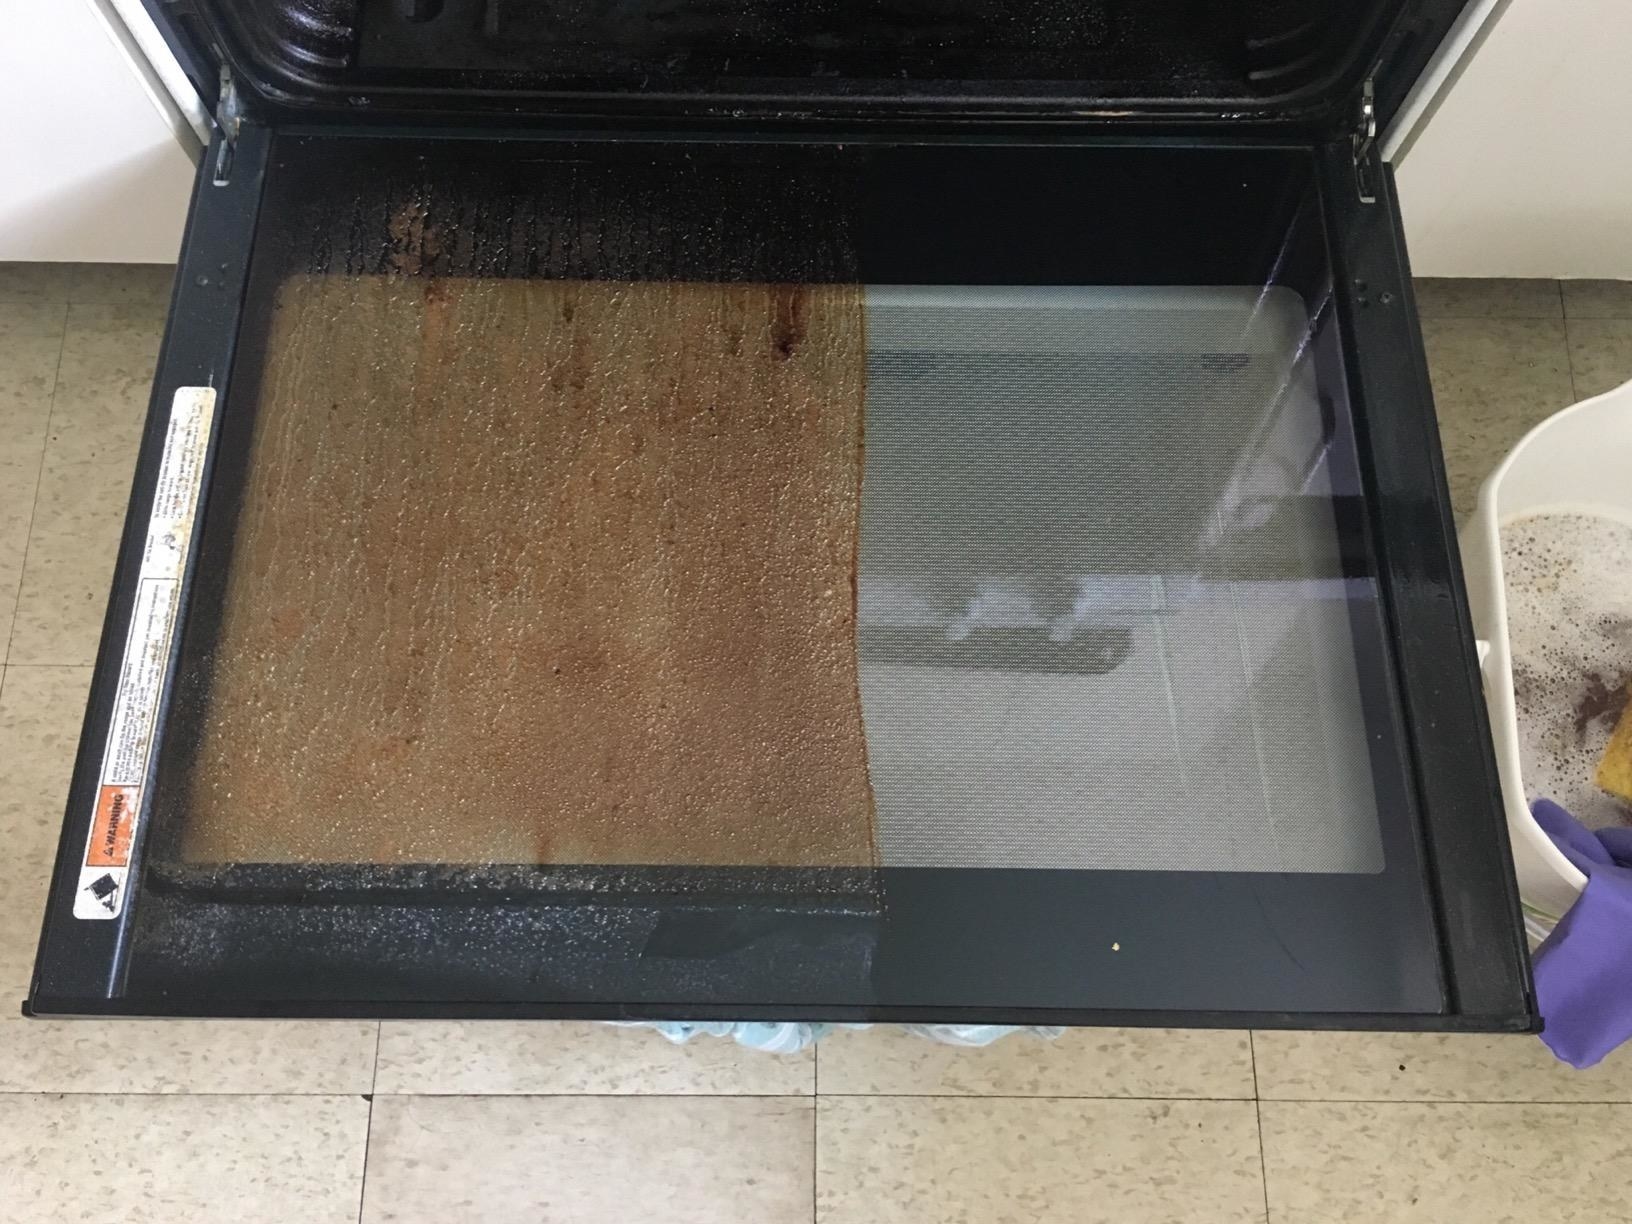 Reviewer photo showing oven door revealing caked-on grime on half of it and a clean surface on the other half